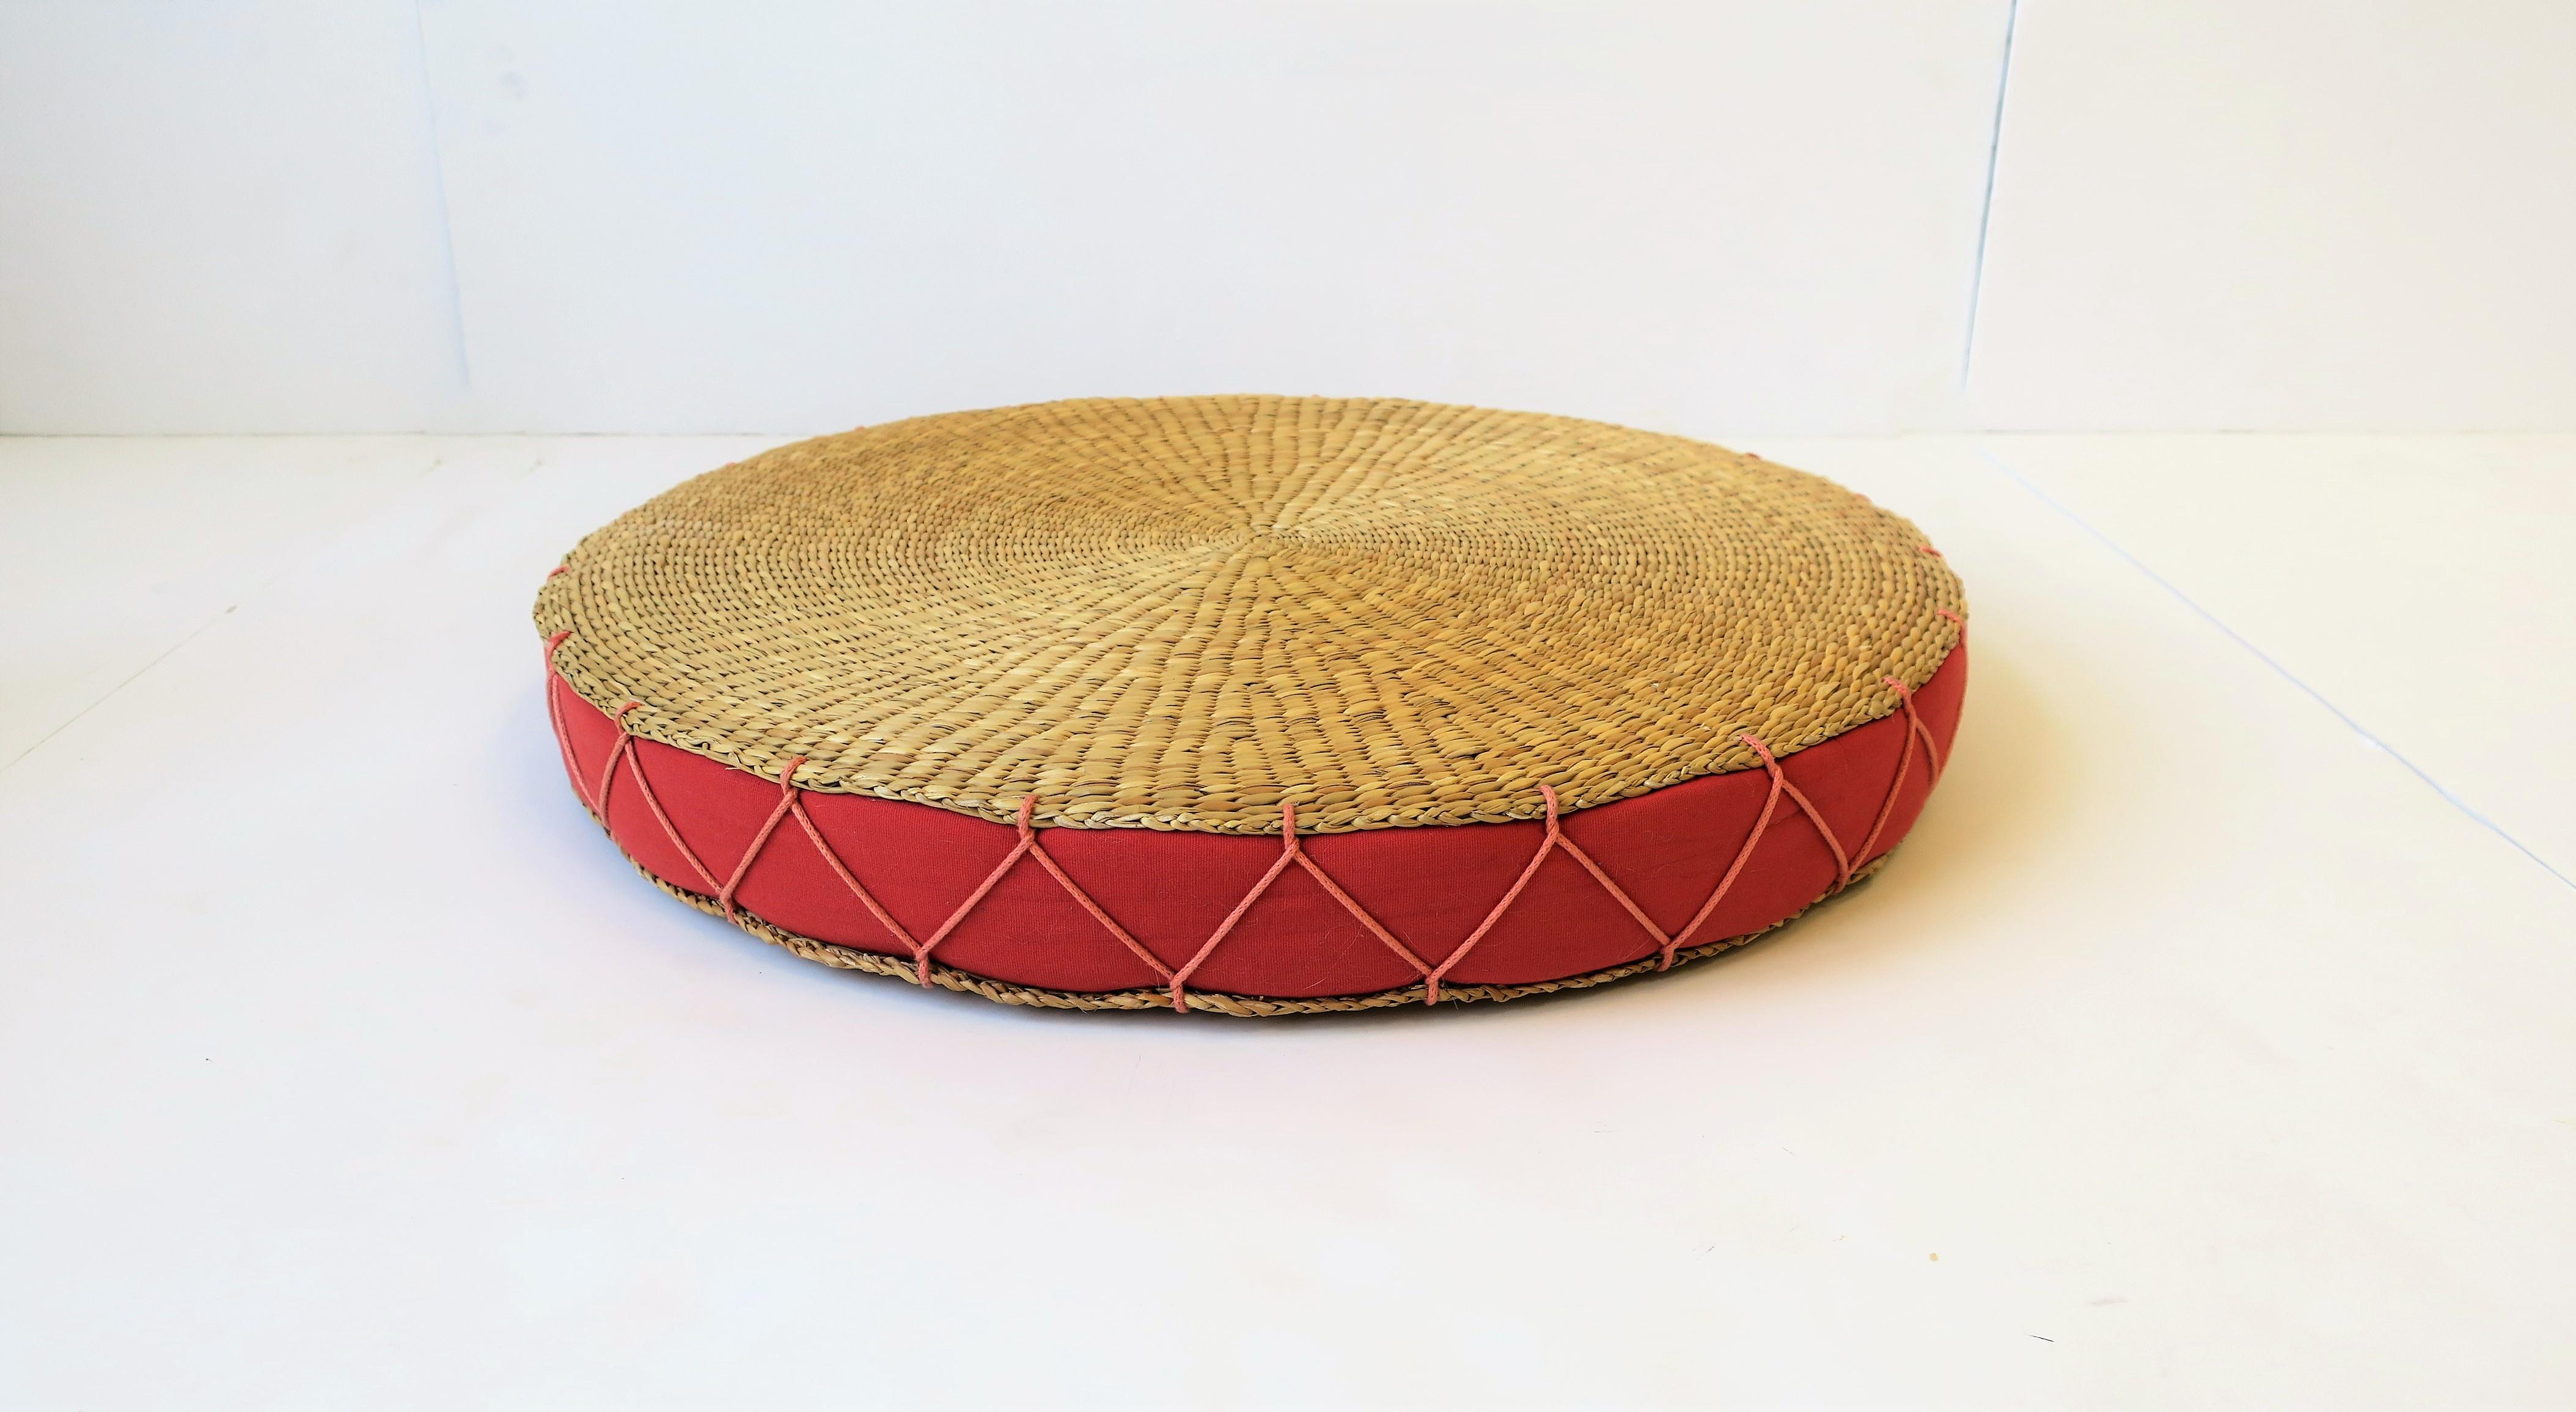 A vintage wicker tray or seat cushion with upholstered insert and large 'X' stitching around. 

Piece measures: 18 in. diameter x 2 in. height.